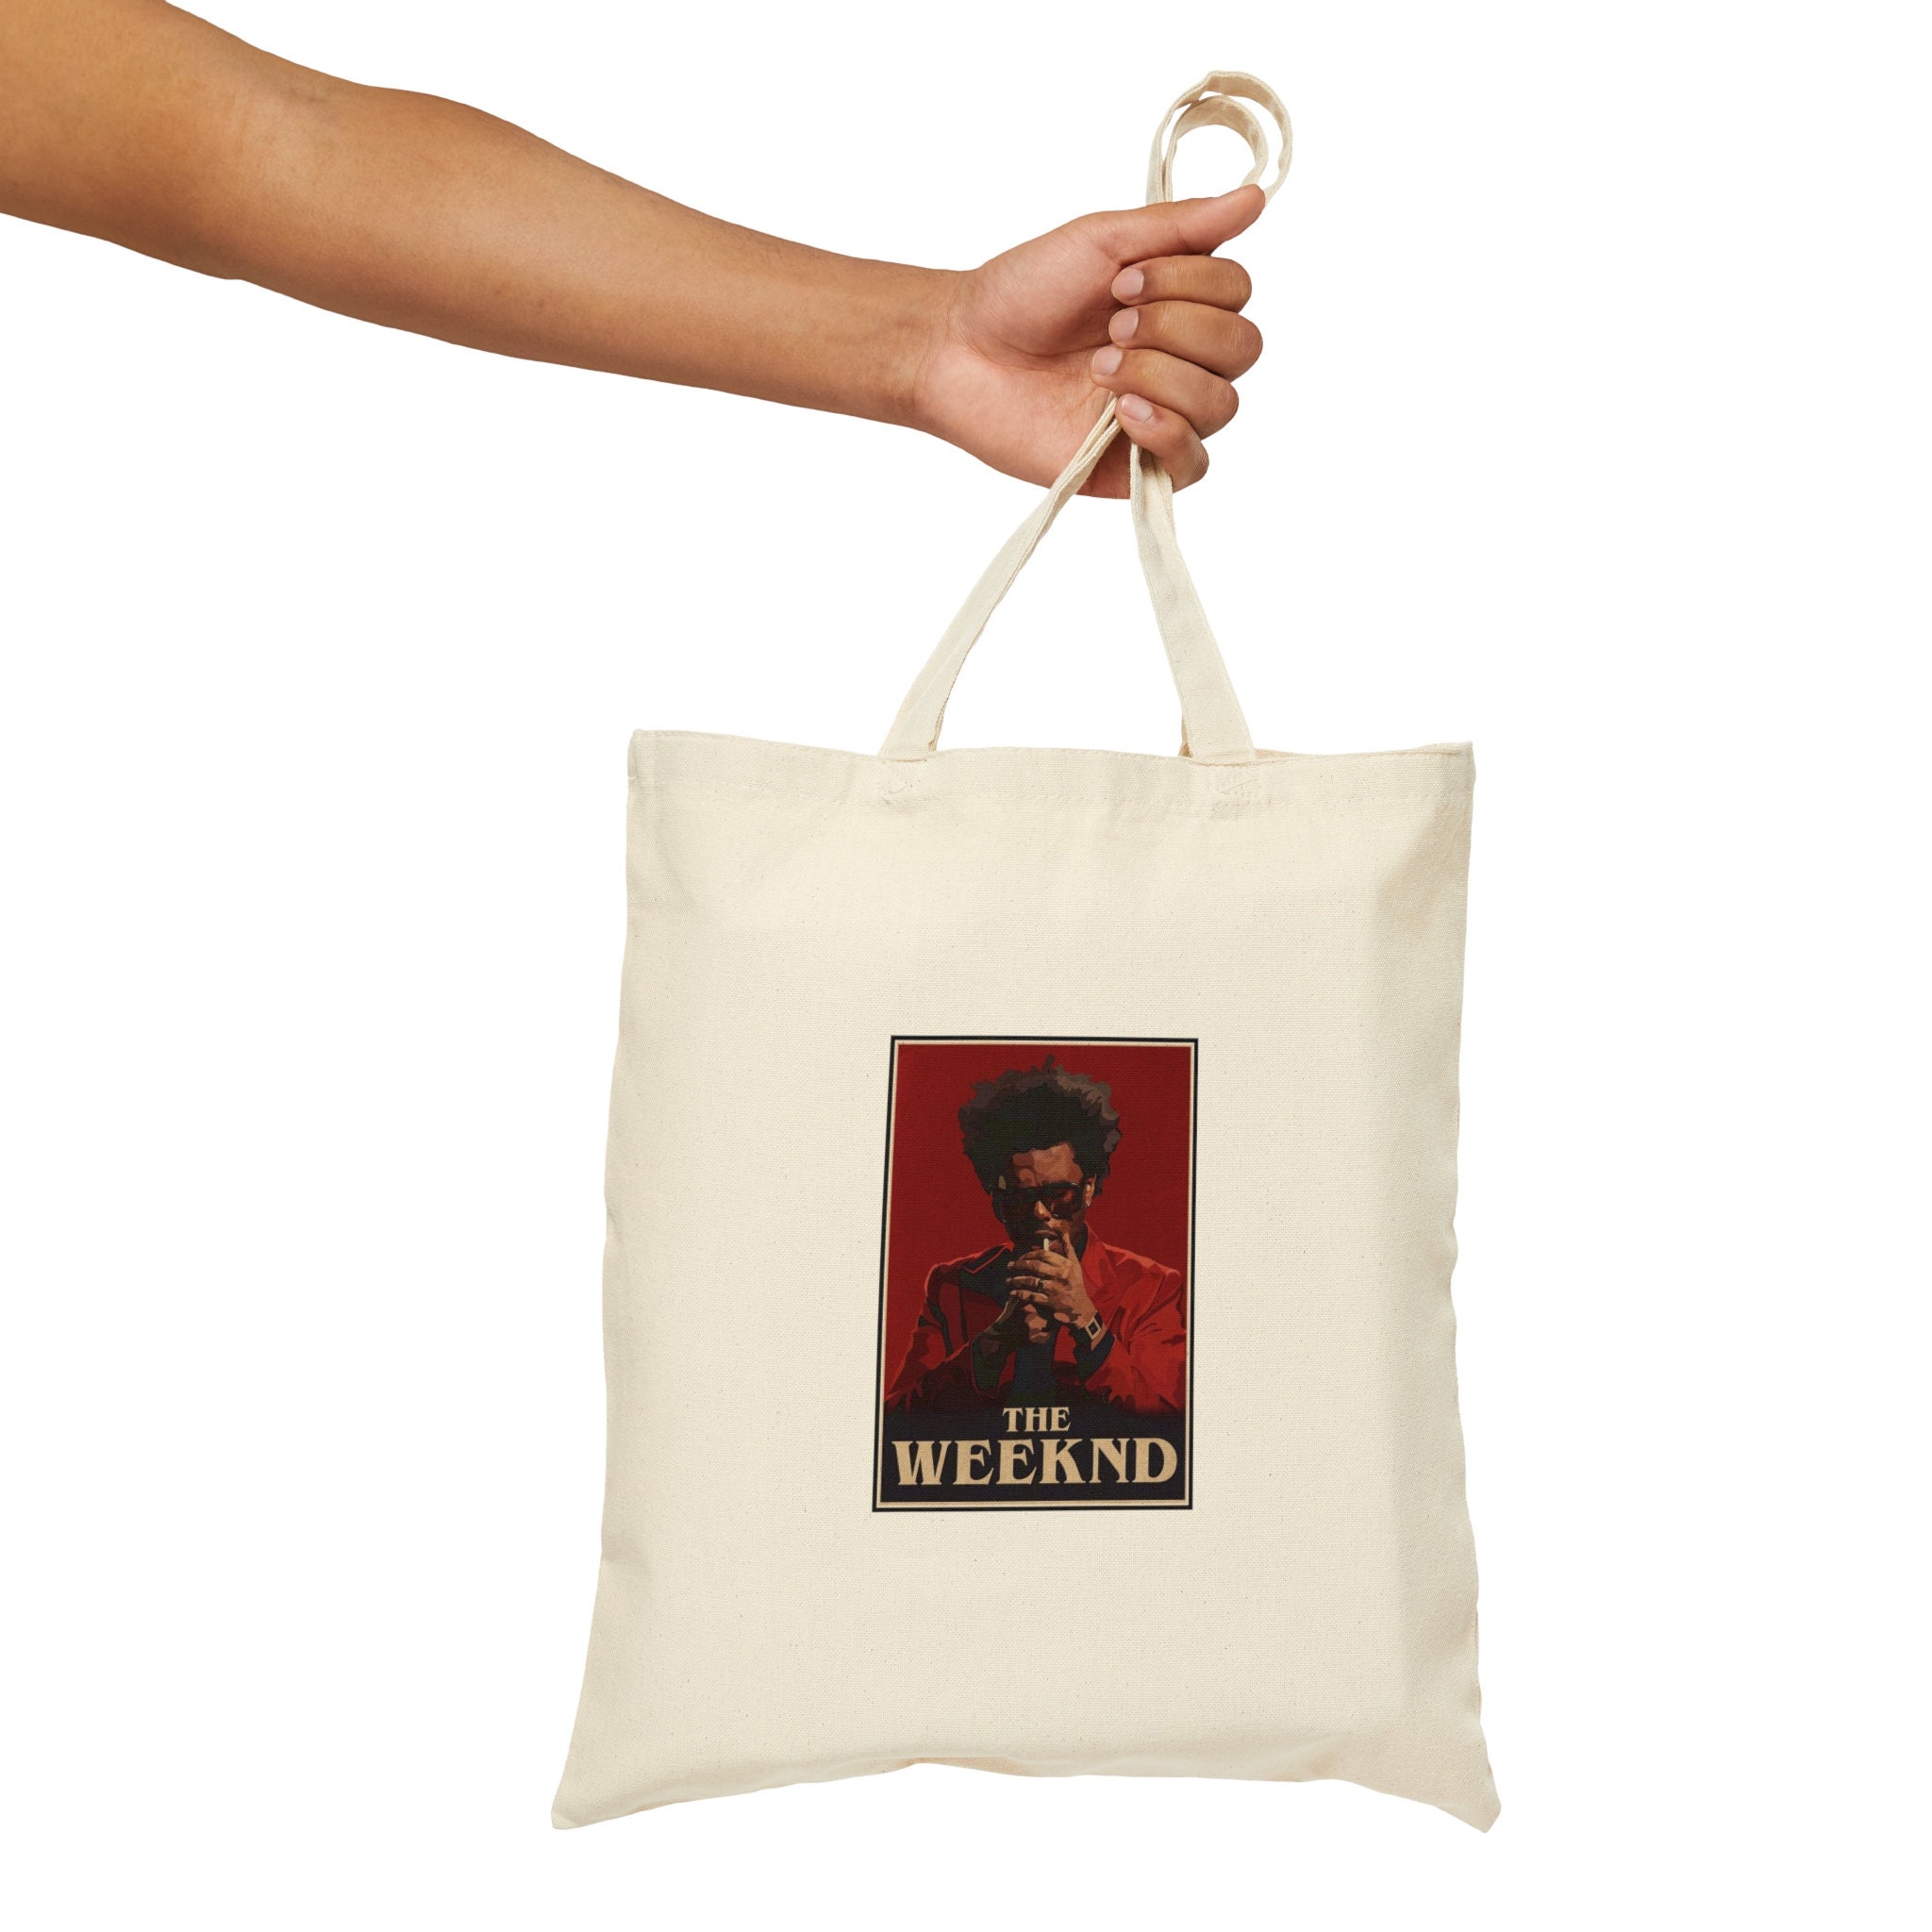 The Weeknd Tote Bag, The Weekend 90s Vintage Bag, The Weeknd Tour